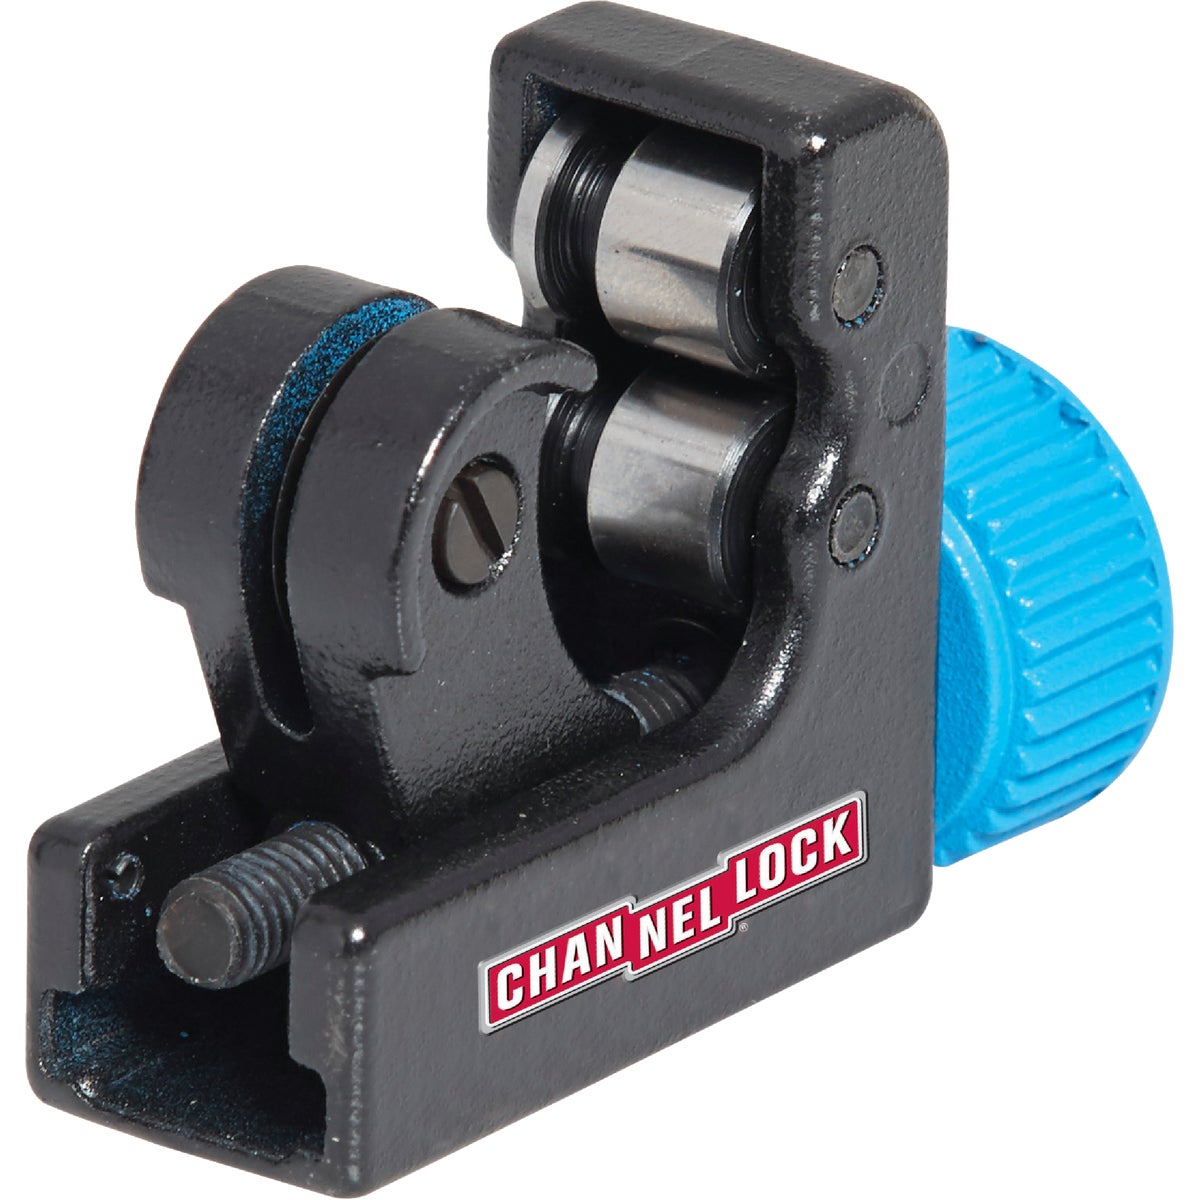 Channellock Mini Tubing Cutter, Up to 1-1/8 In. Pipe Capacity